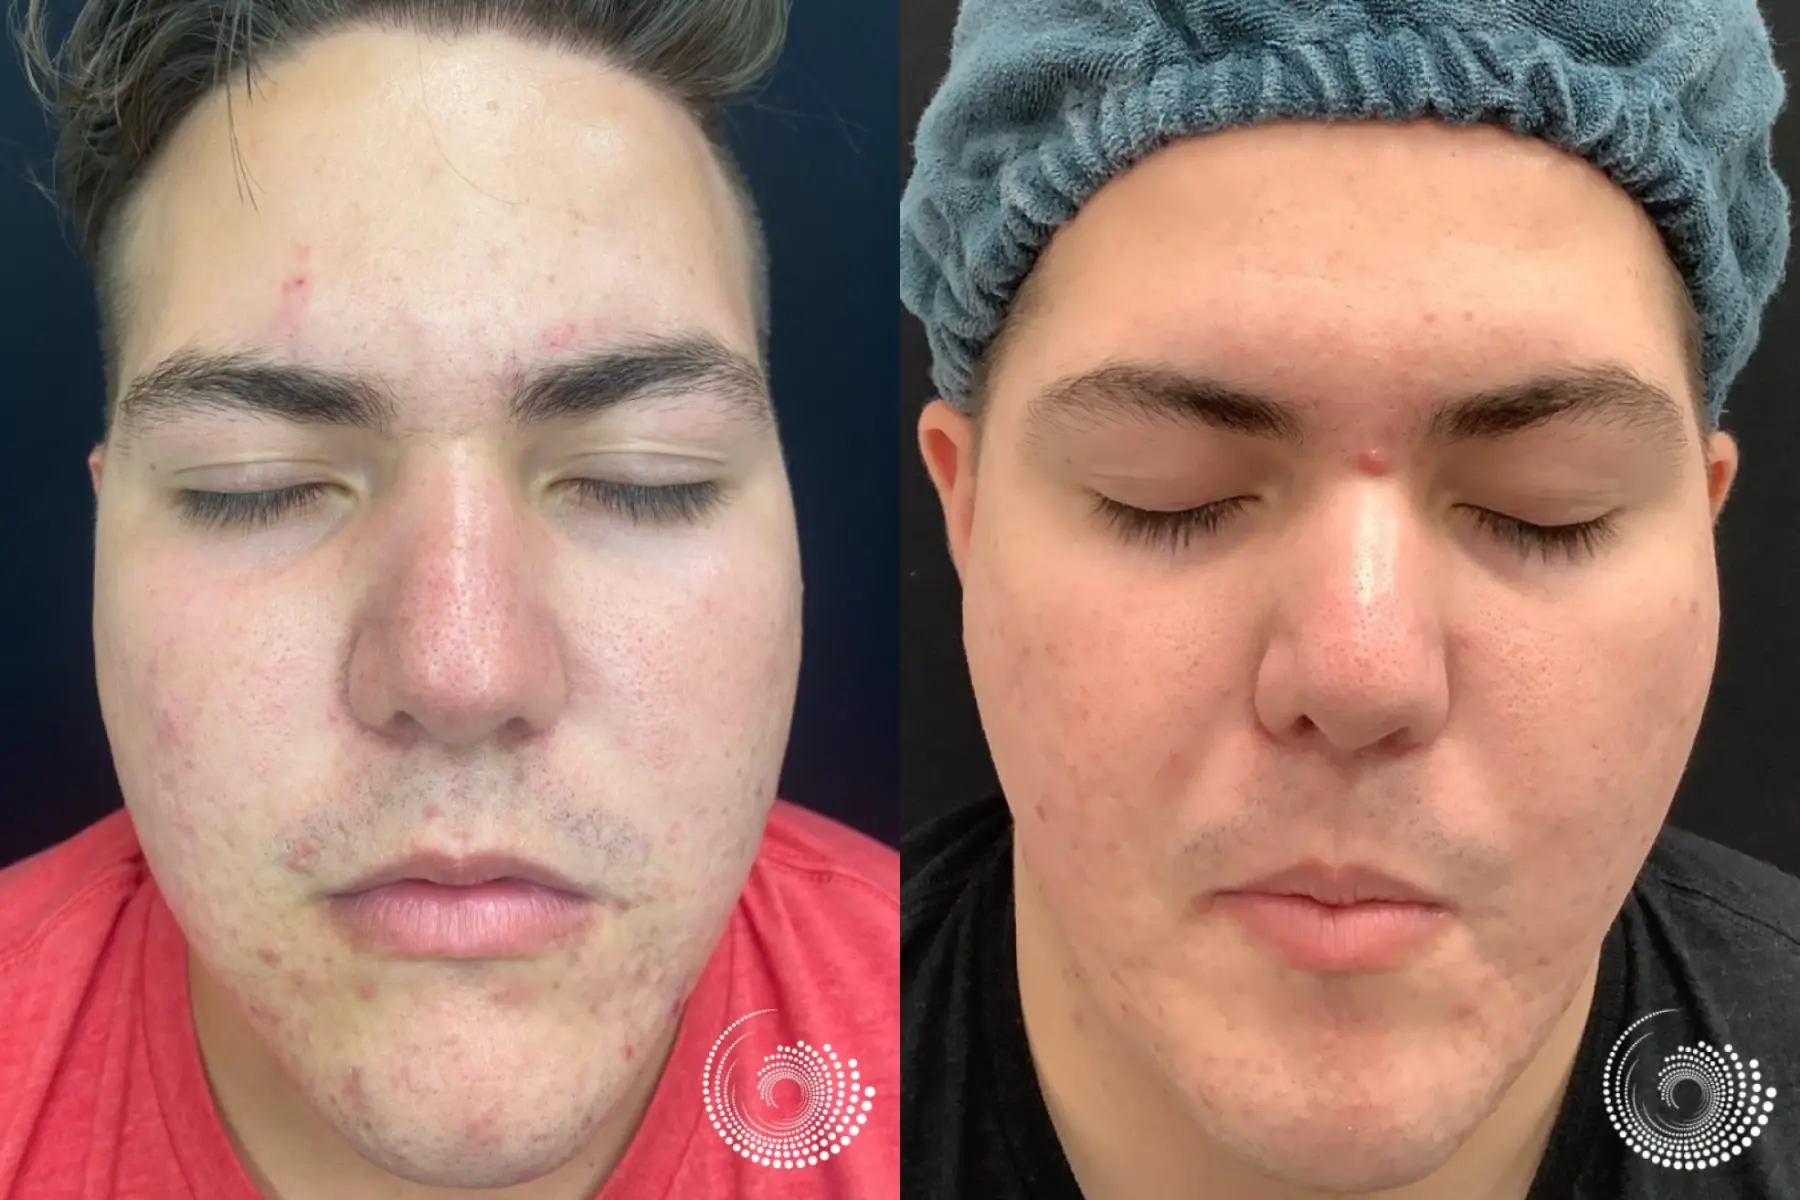 SkinPen Microneedling to smooth acne scars - Before and After